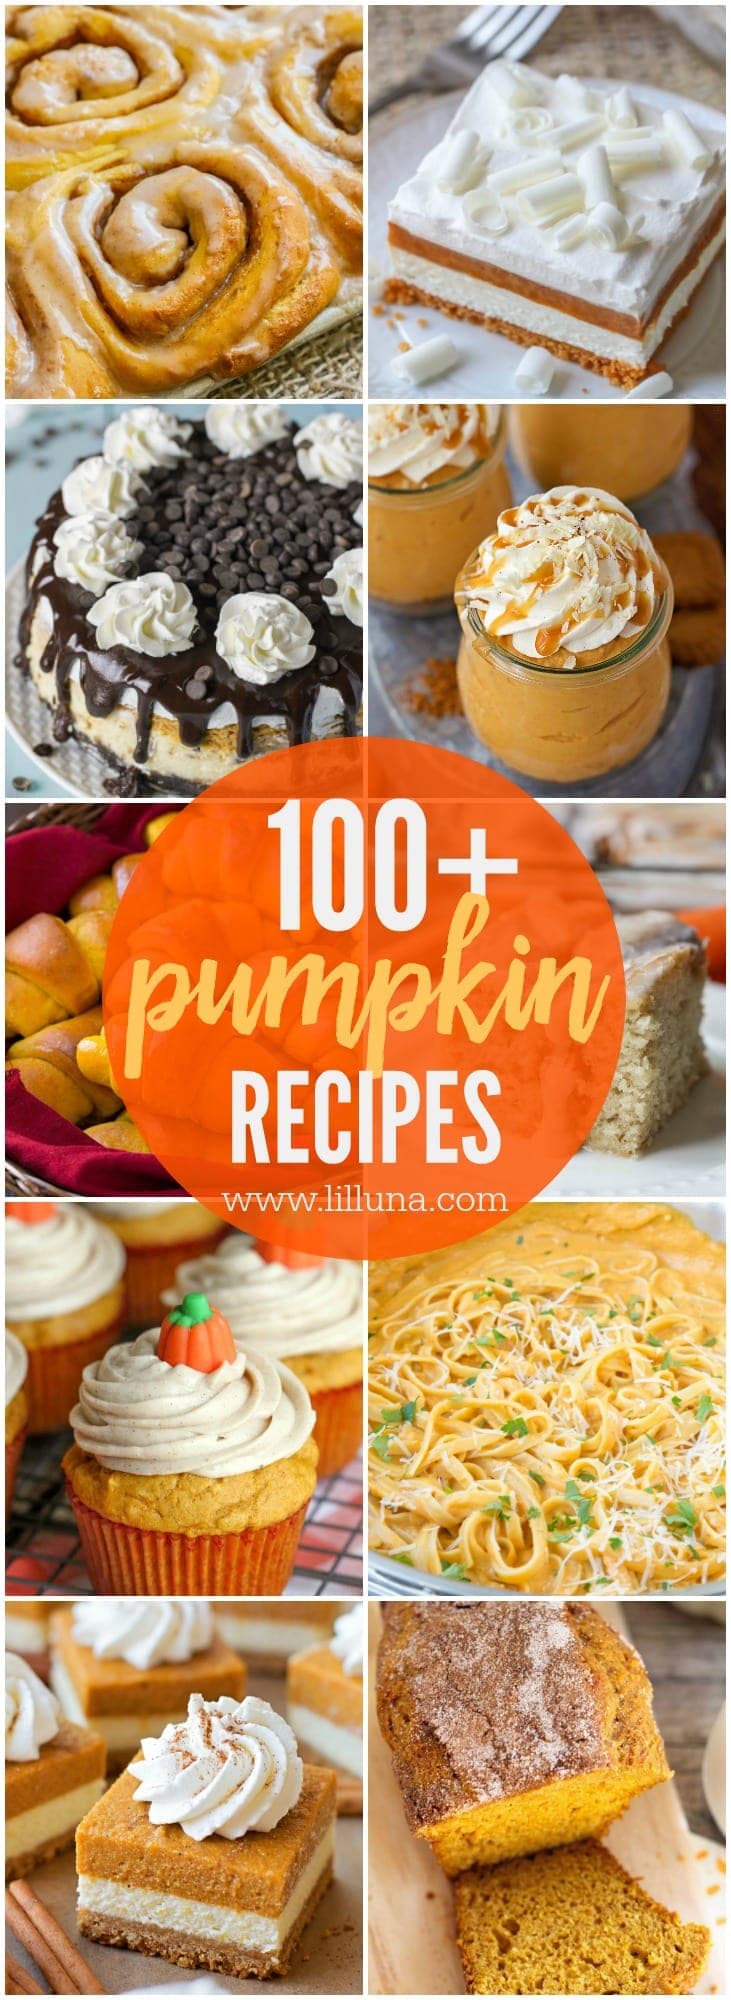 The BEST Pumpkin Recipes collection - from sweet to savory, this collection has loads of pumpkin dessert, breakfast, bread and pasta recipes to try.